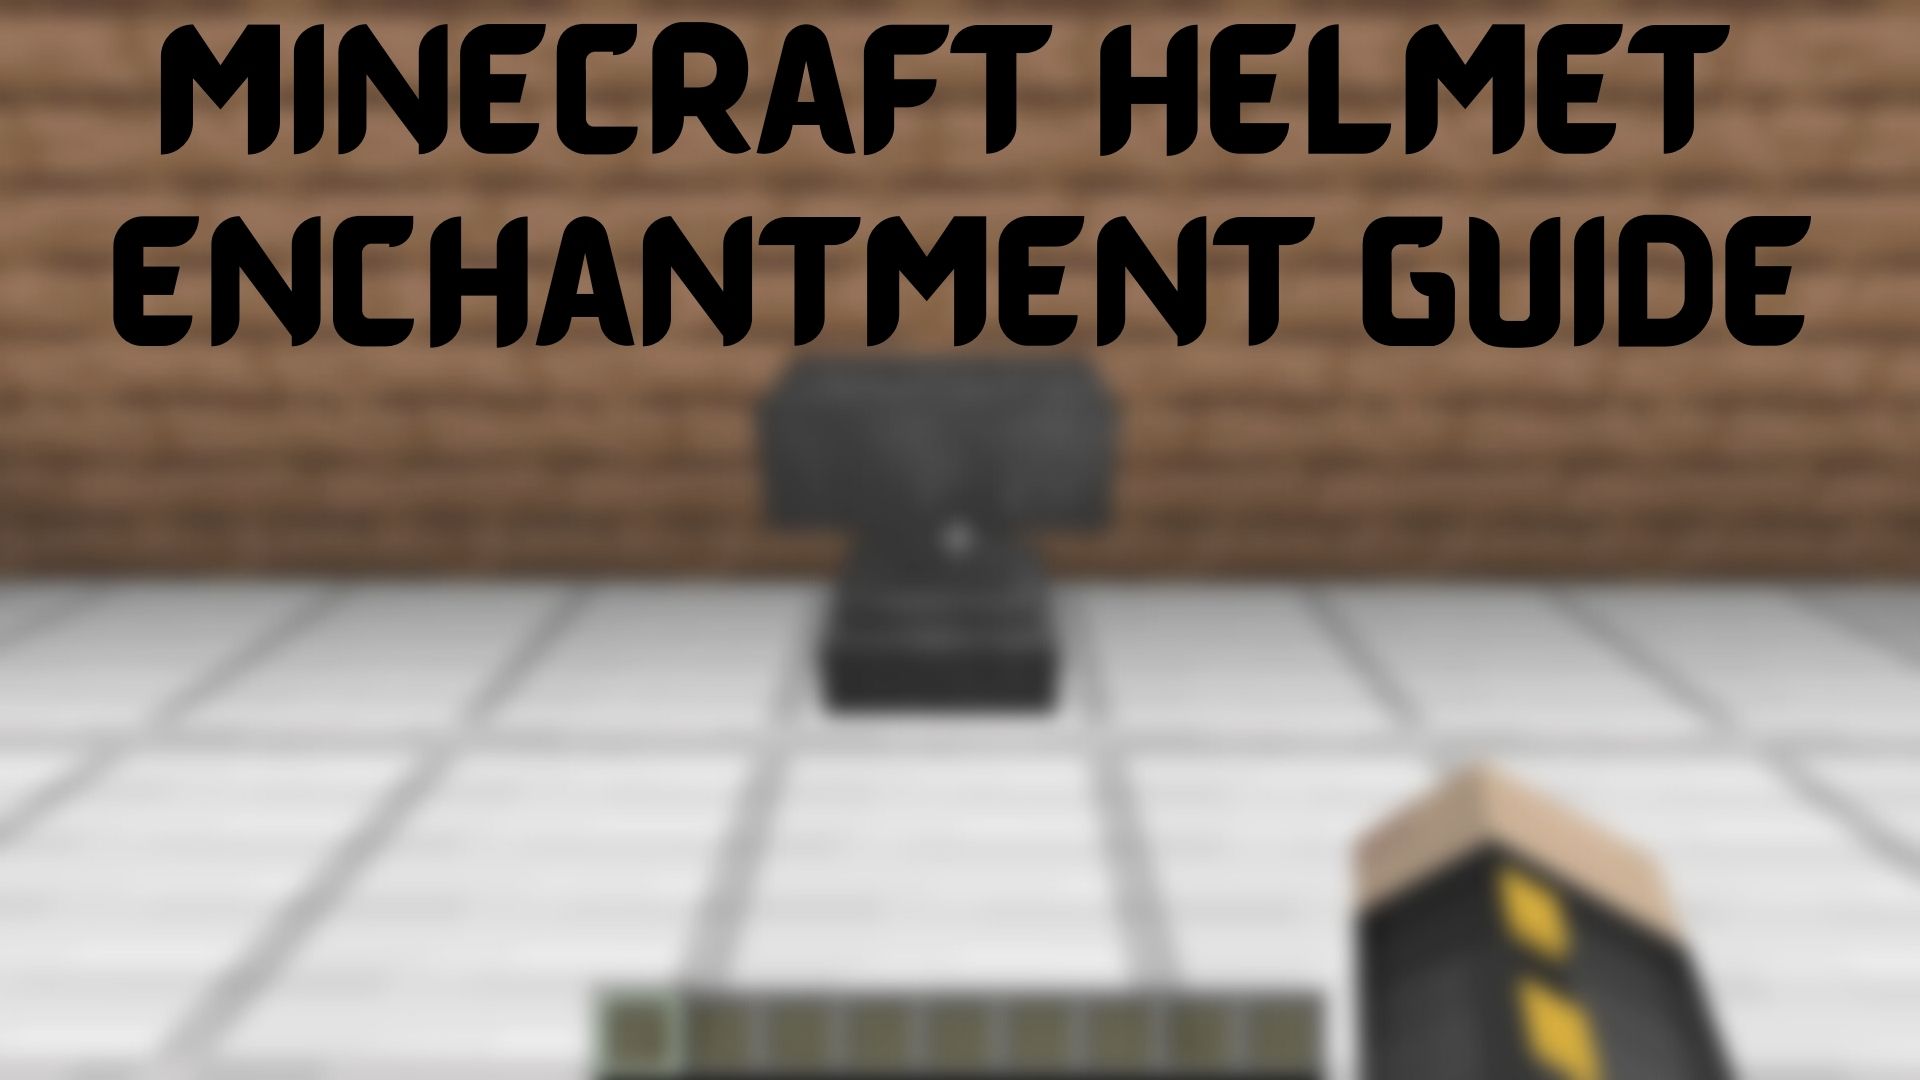 Guide to enchant the Helmet